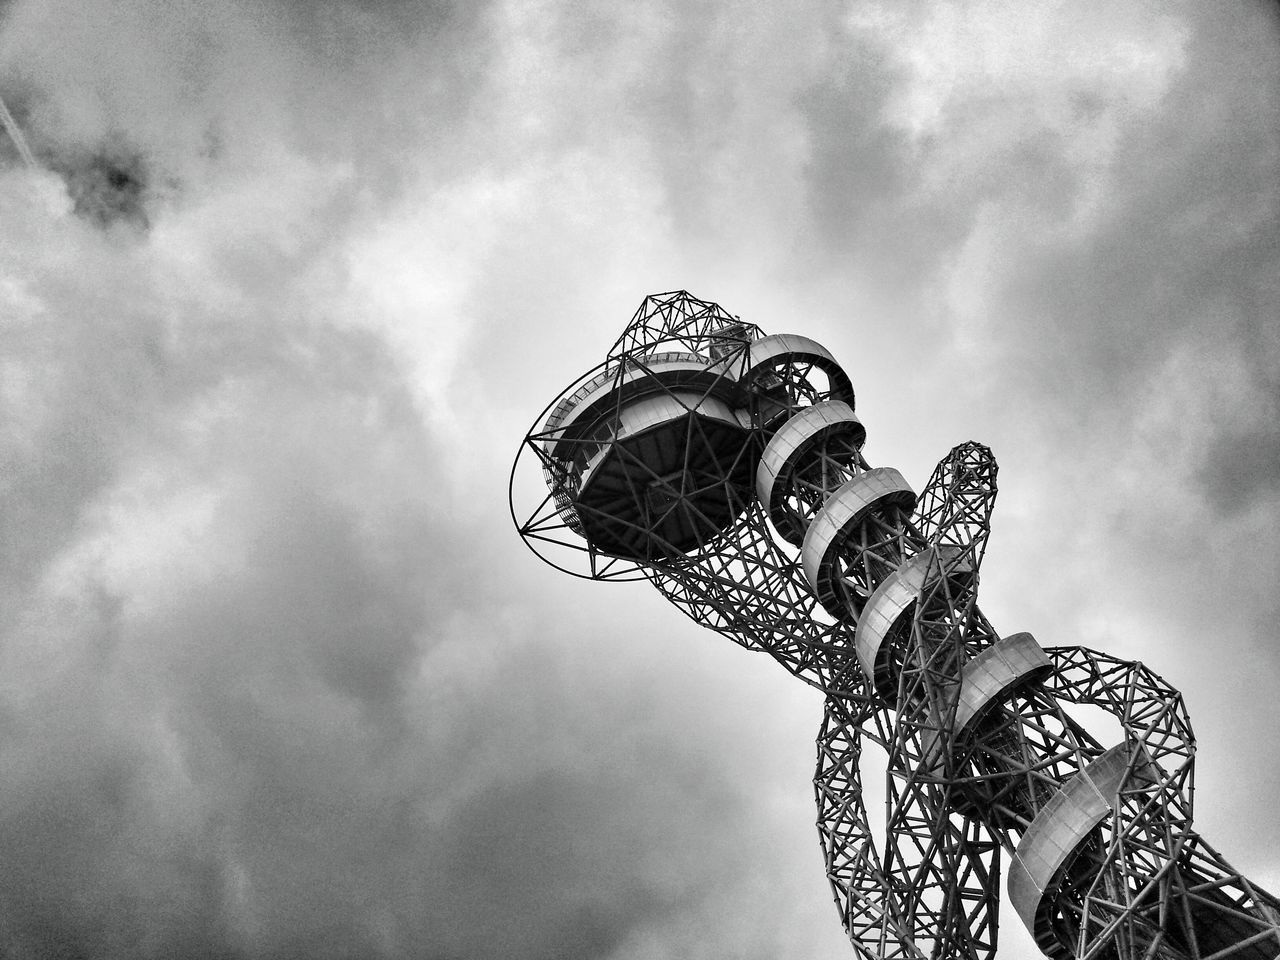 low angle view, sky, cloud - sky, cloudy, built structure, architecture, cloud, amusement park, metal, ferris wheel, arts culture and entertainment, amusement park ride, tall - high, metallic, overcast, day, no people, outdoors, tower, high section